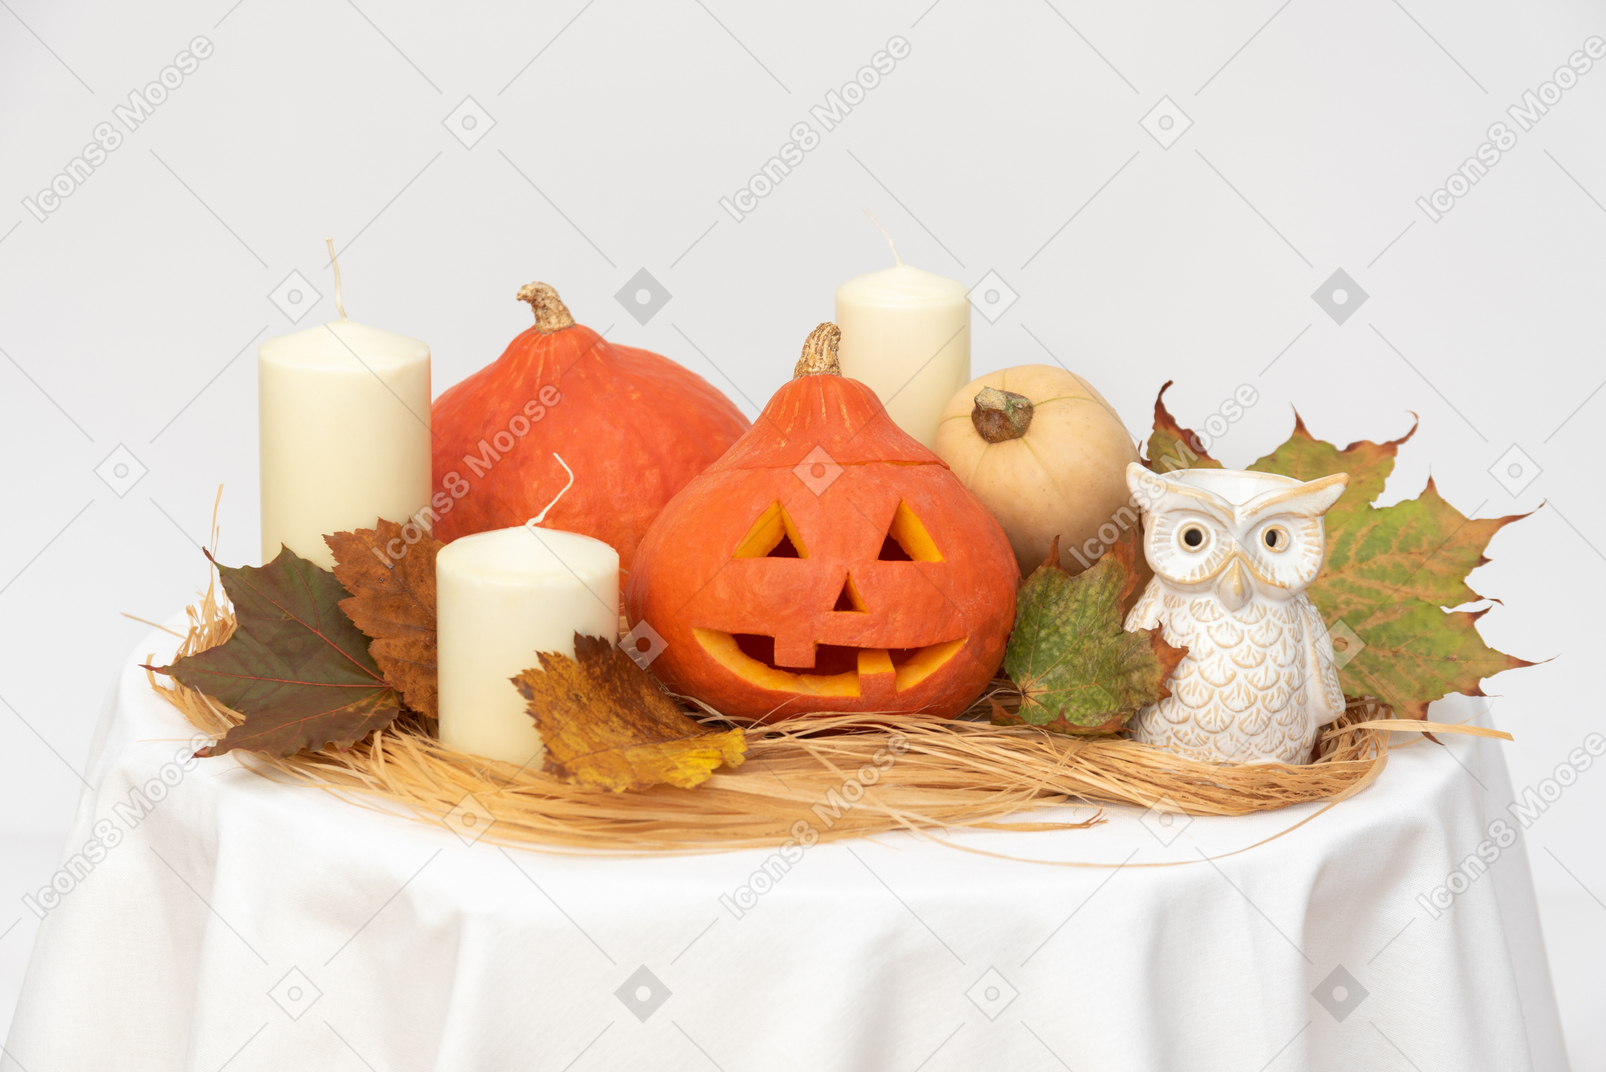 Carved pumpkins, yellow leaves, candles and owl figure